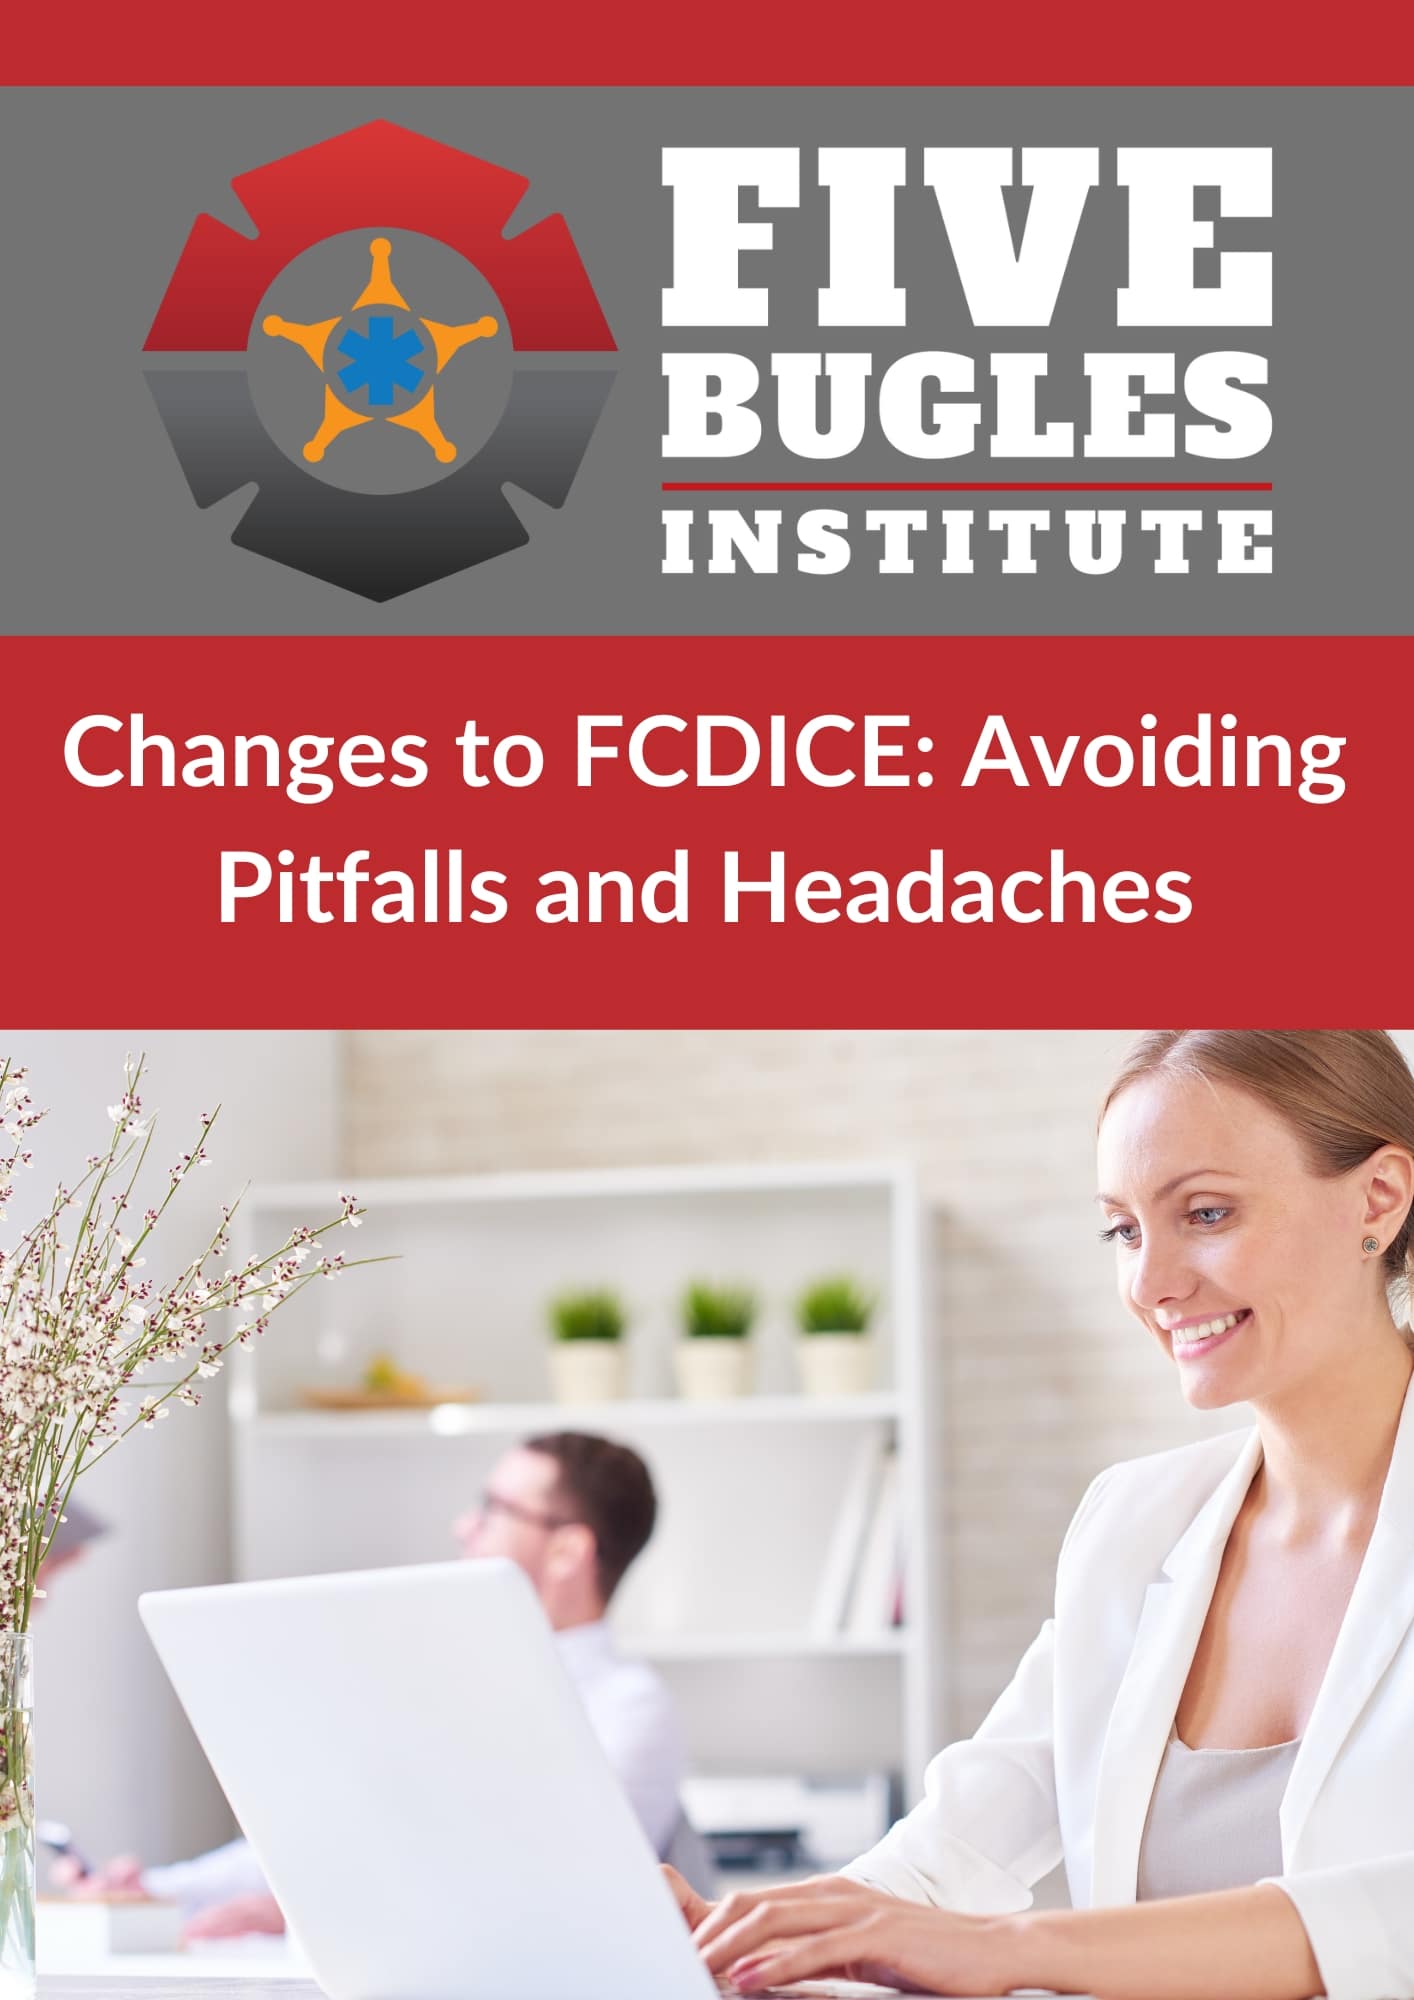 Changes to FCDICE Avoiding Pitfalls and Headaches